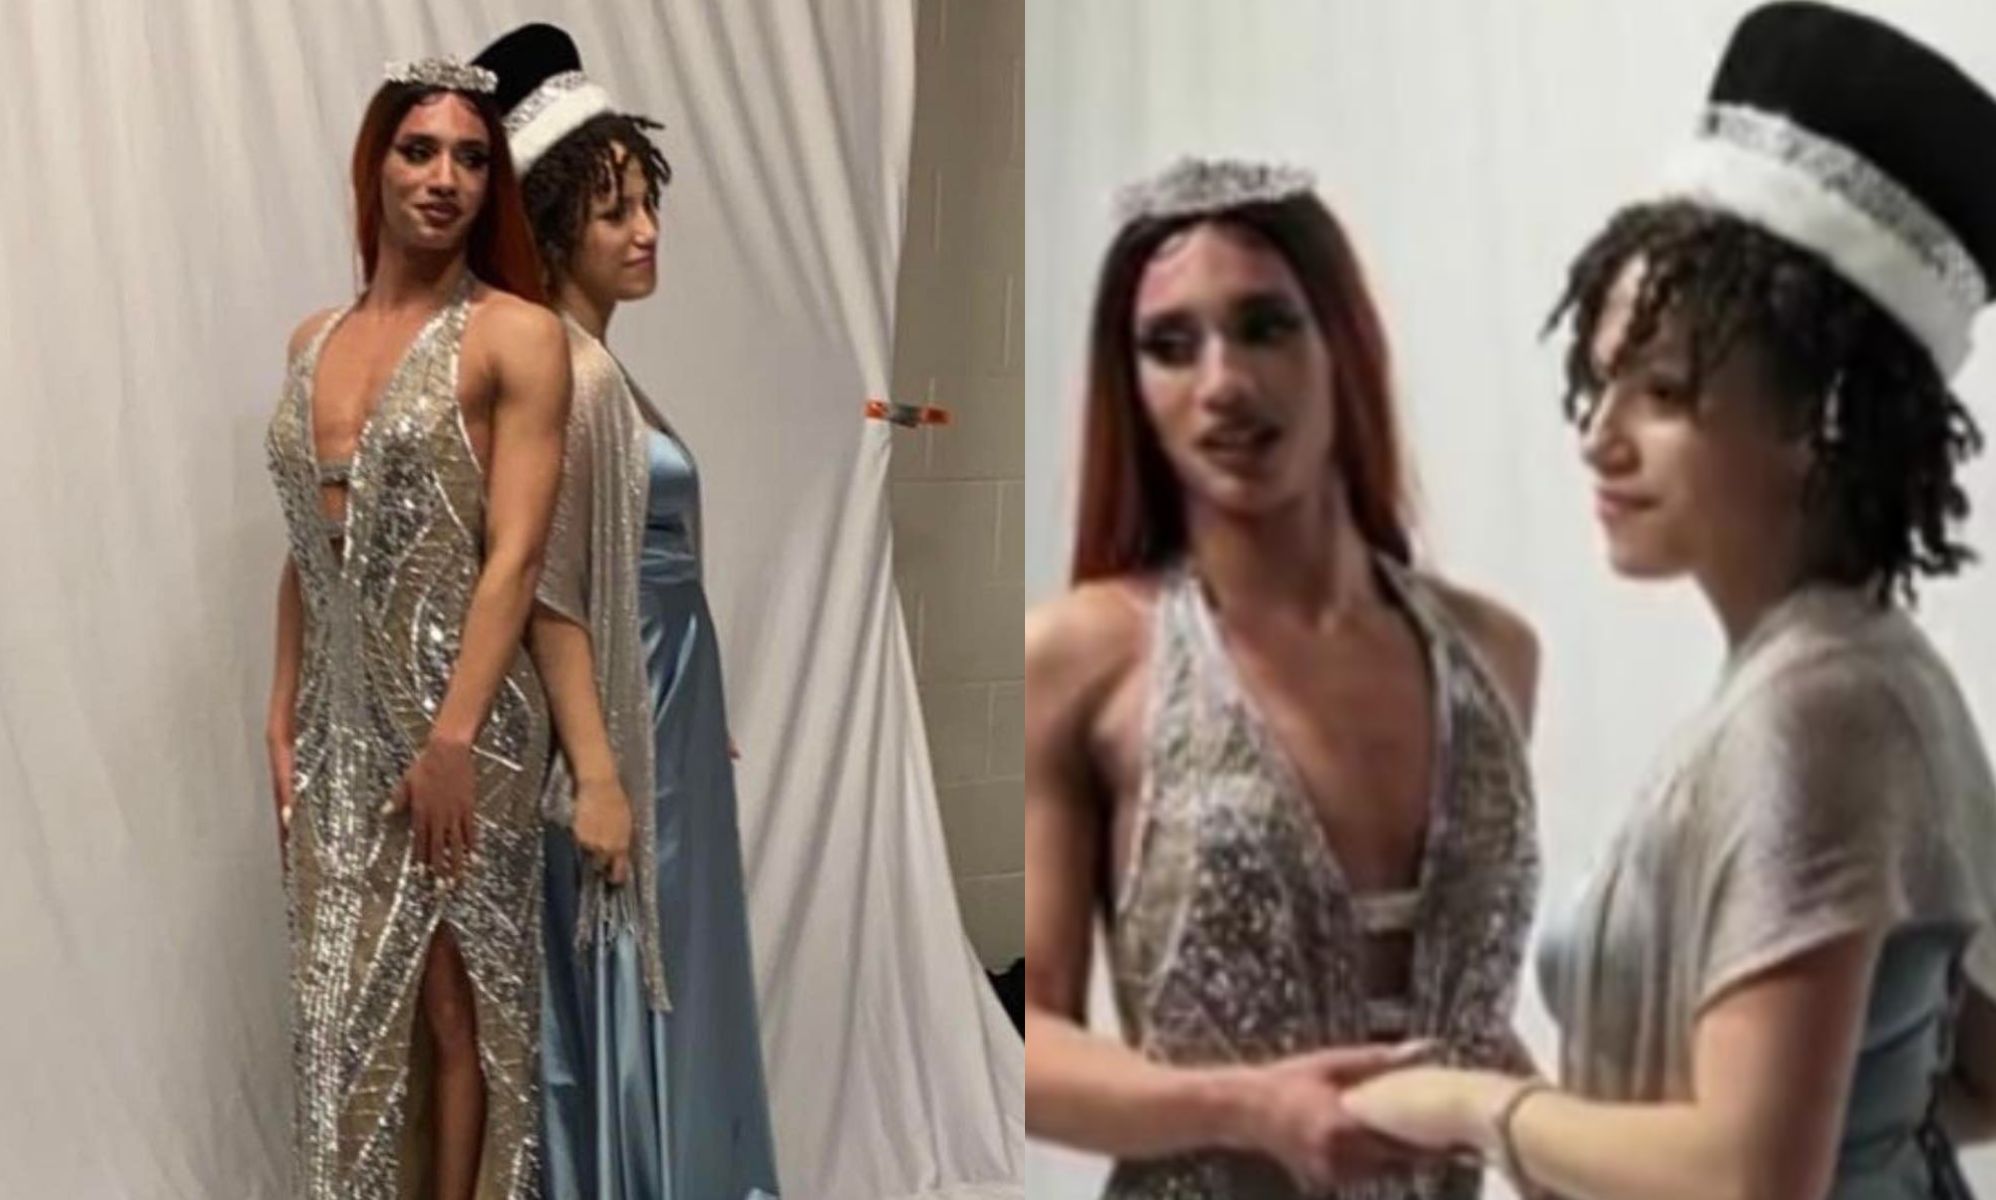 Man arrested over threats after queer students crowned prom king and queen